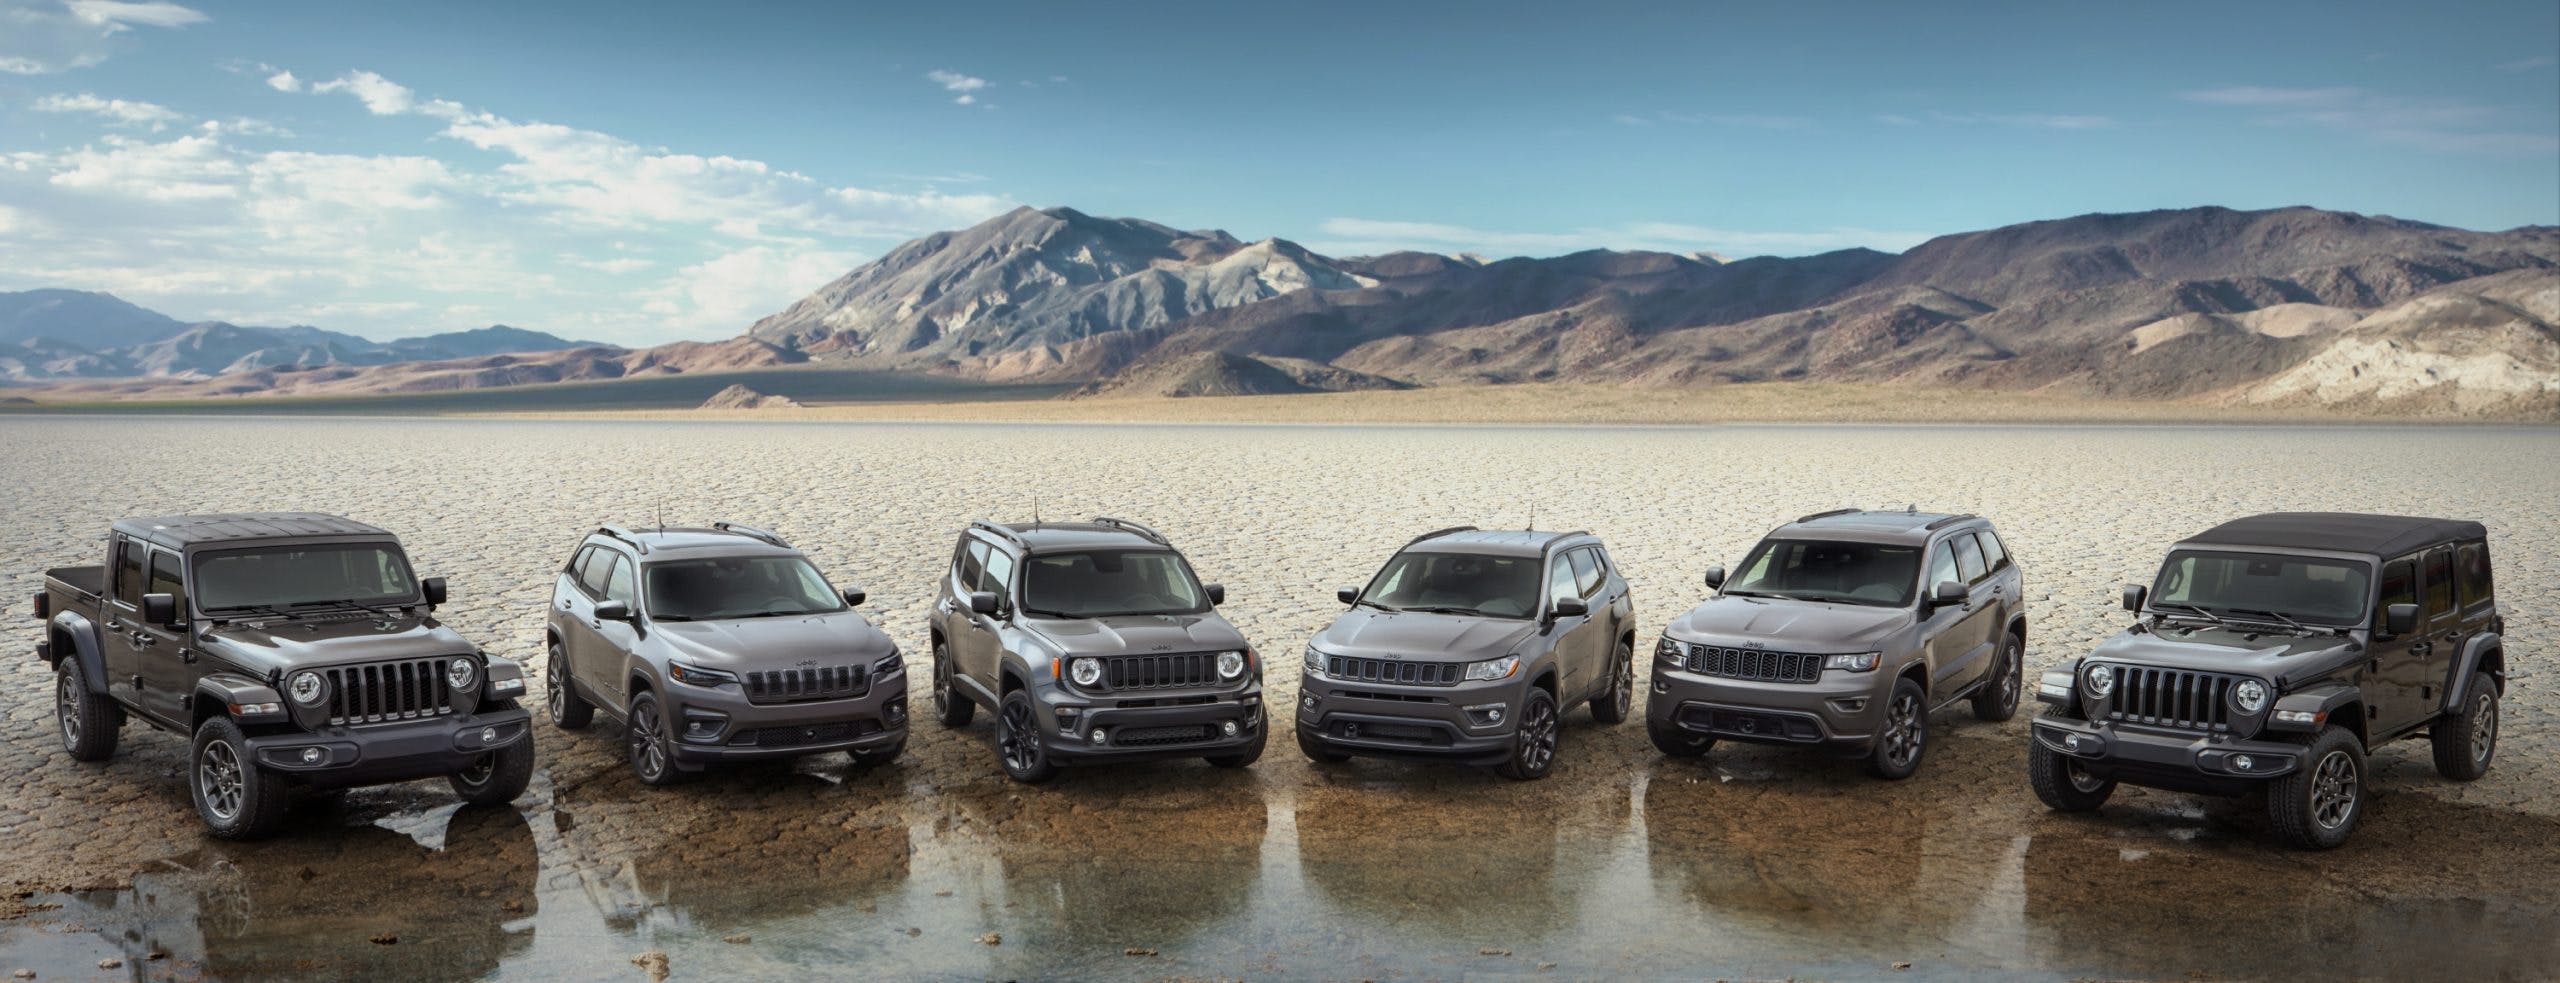 Jeep announces 80th Anniversary models and free maintenance for '21 Jeeps -  Hagerty Media